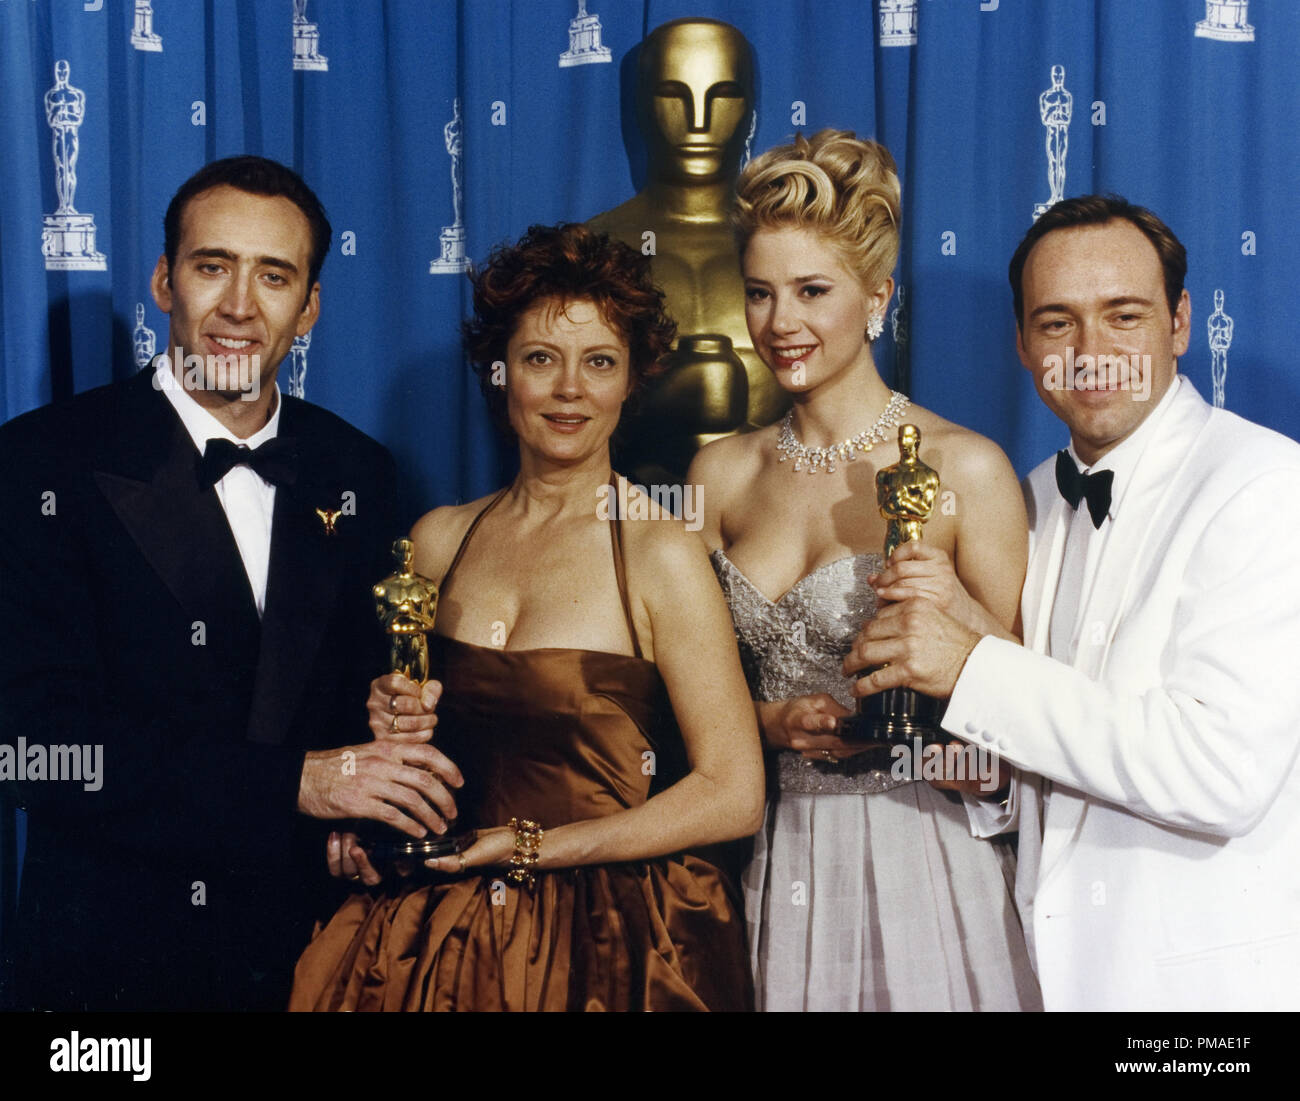 Nicholas Cage, Susan Sarandan, Mira Sorvino, and Kevin Spacey at the 68th Annual Academy Awards, 1996  File Reference # 32509 490THA Stock Photo